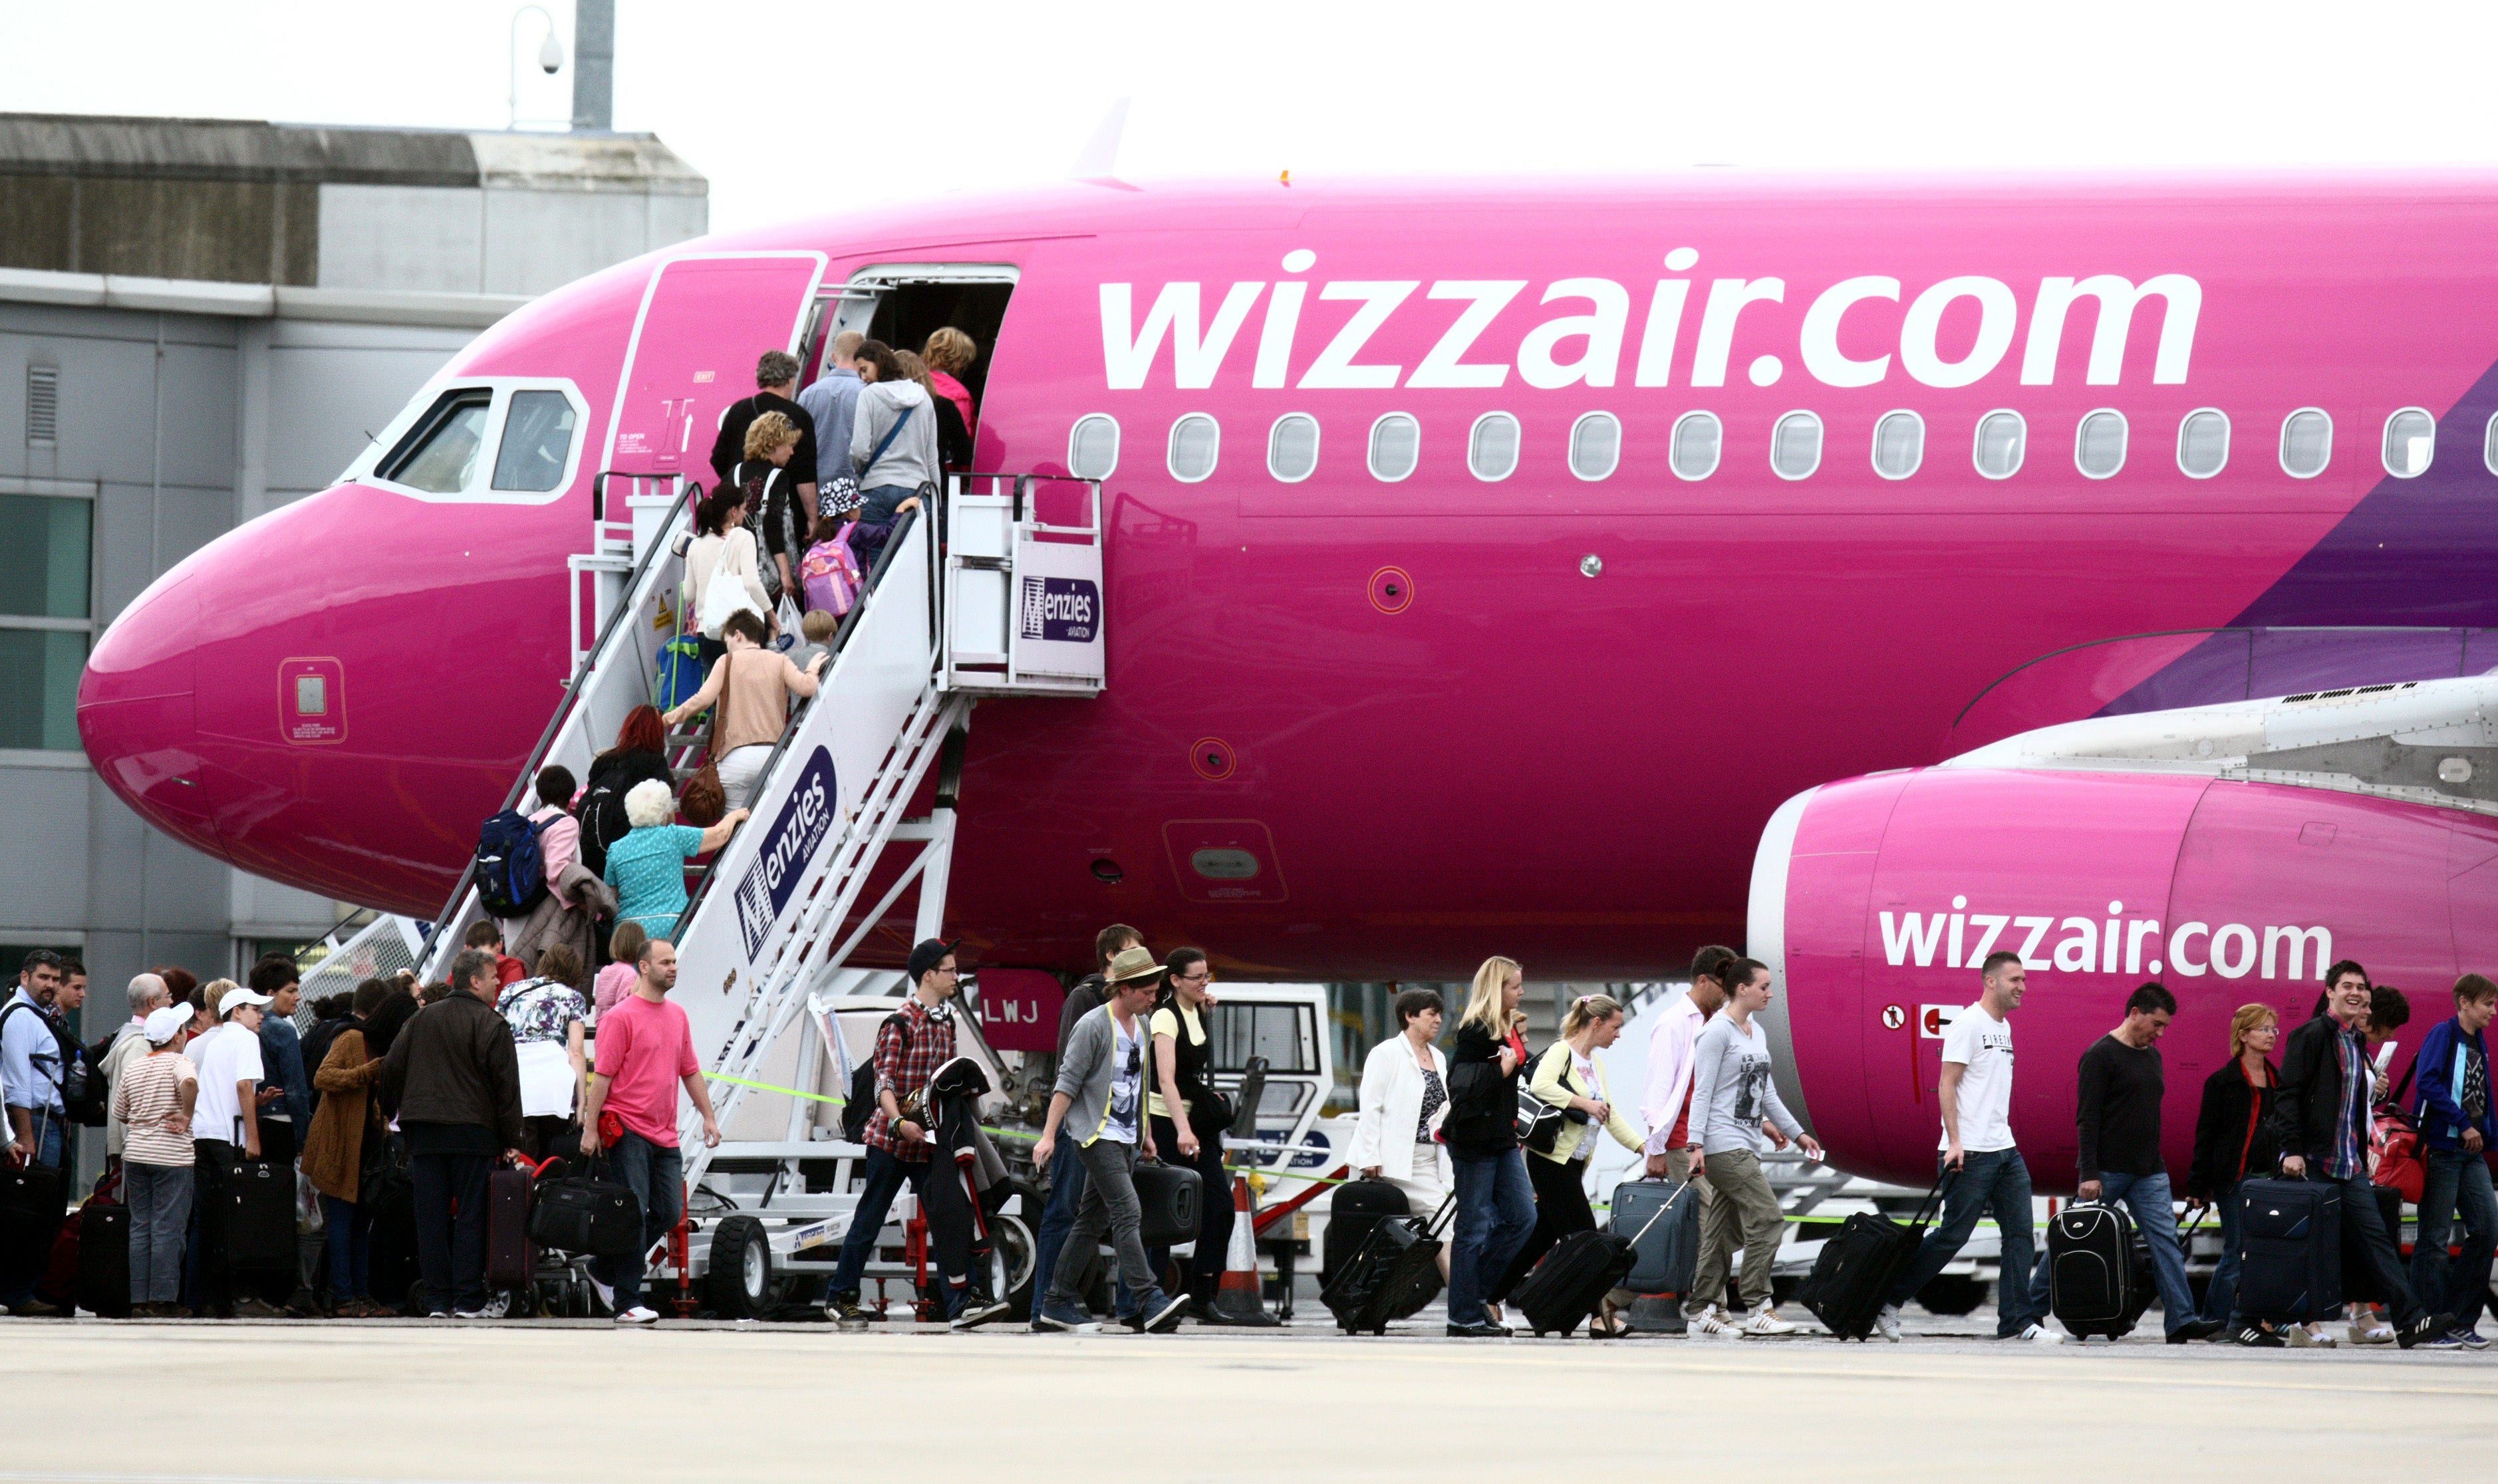 Wizz Air says tickets are already more expensive than before the pandemic, and will increase even faster later this year